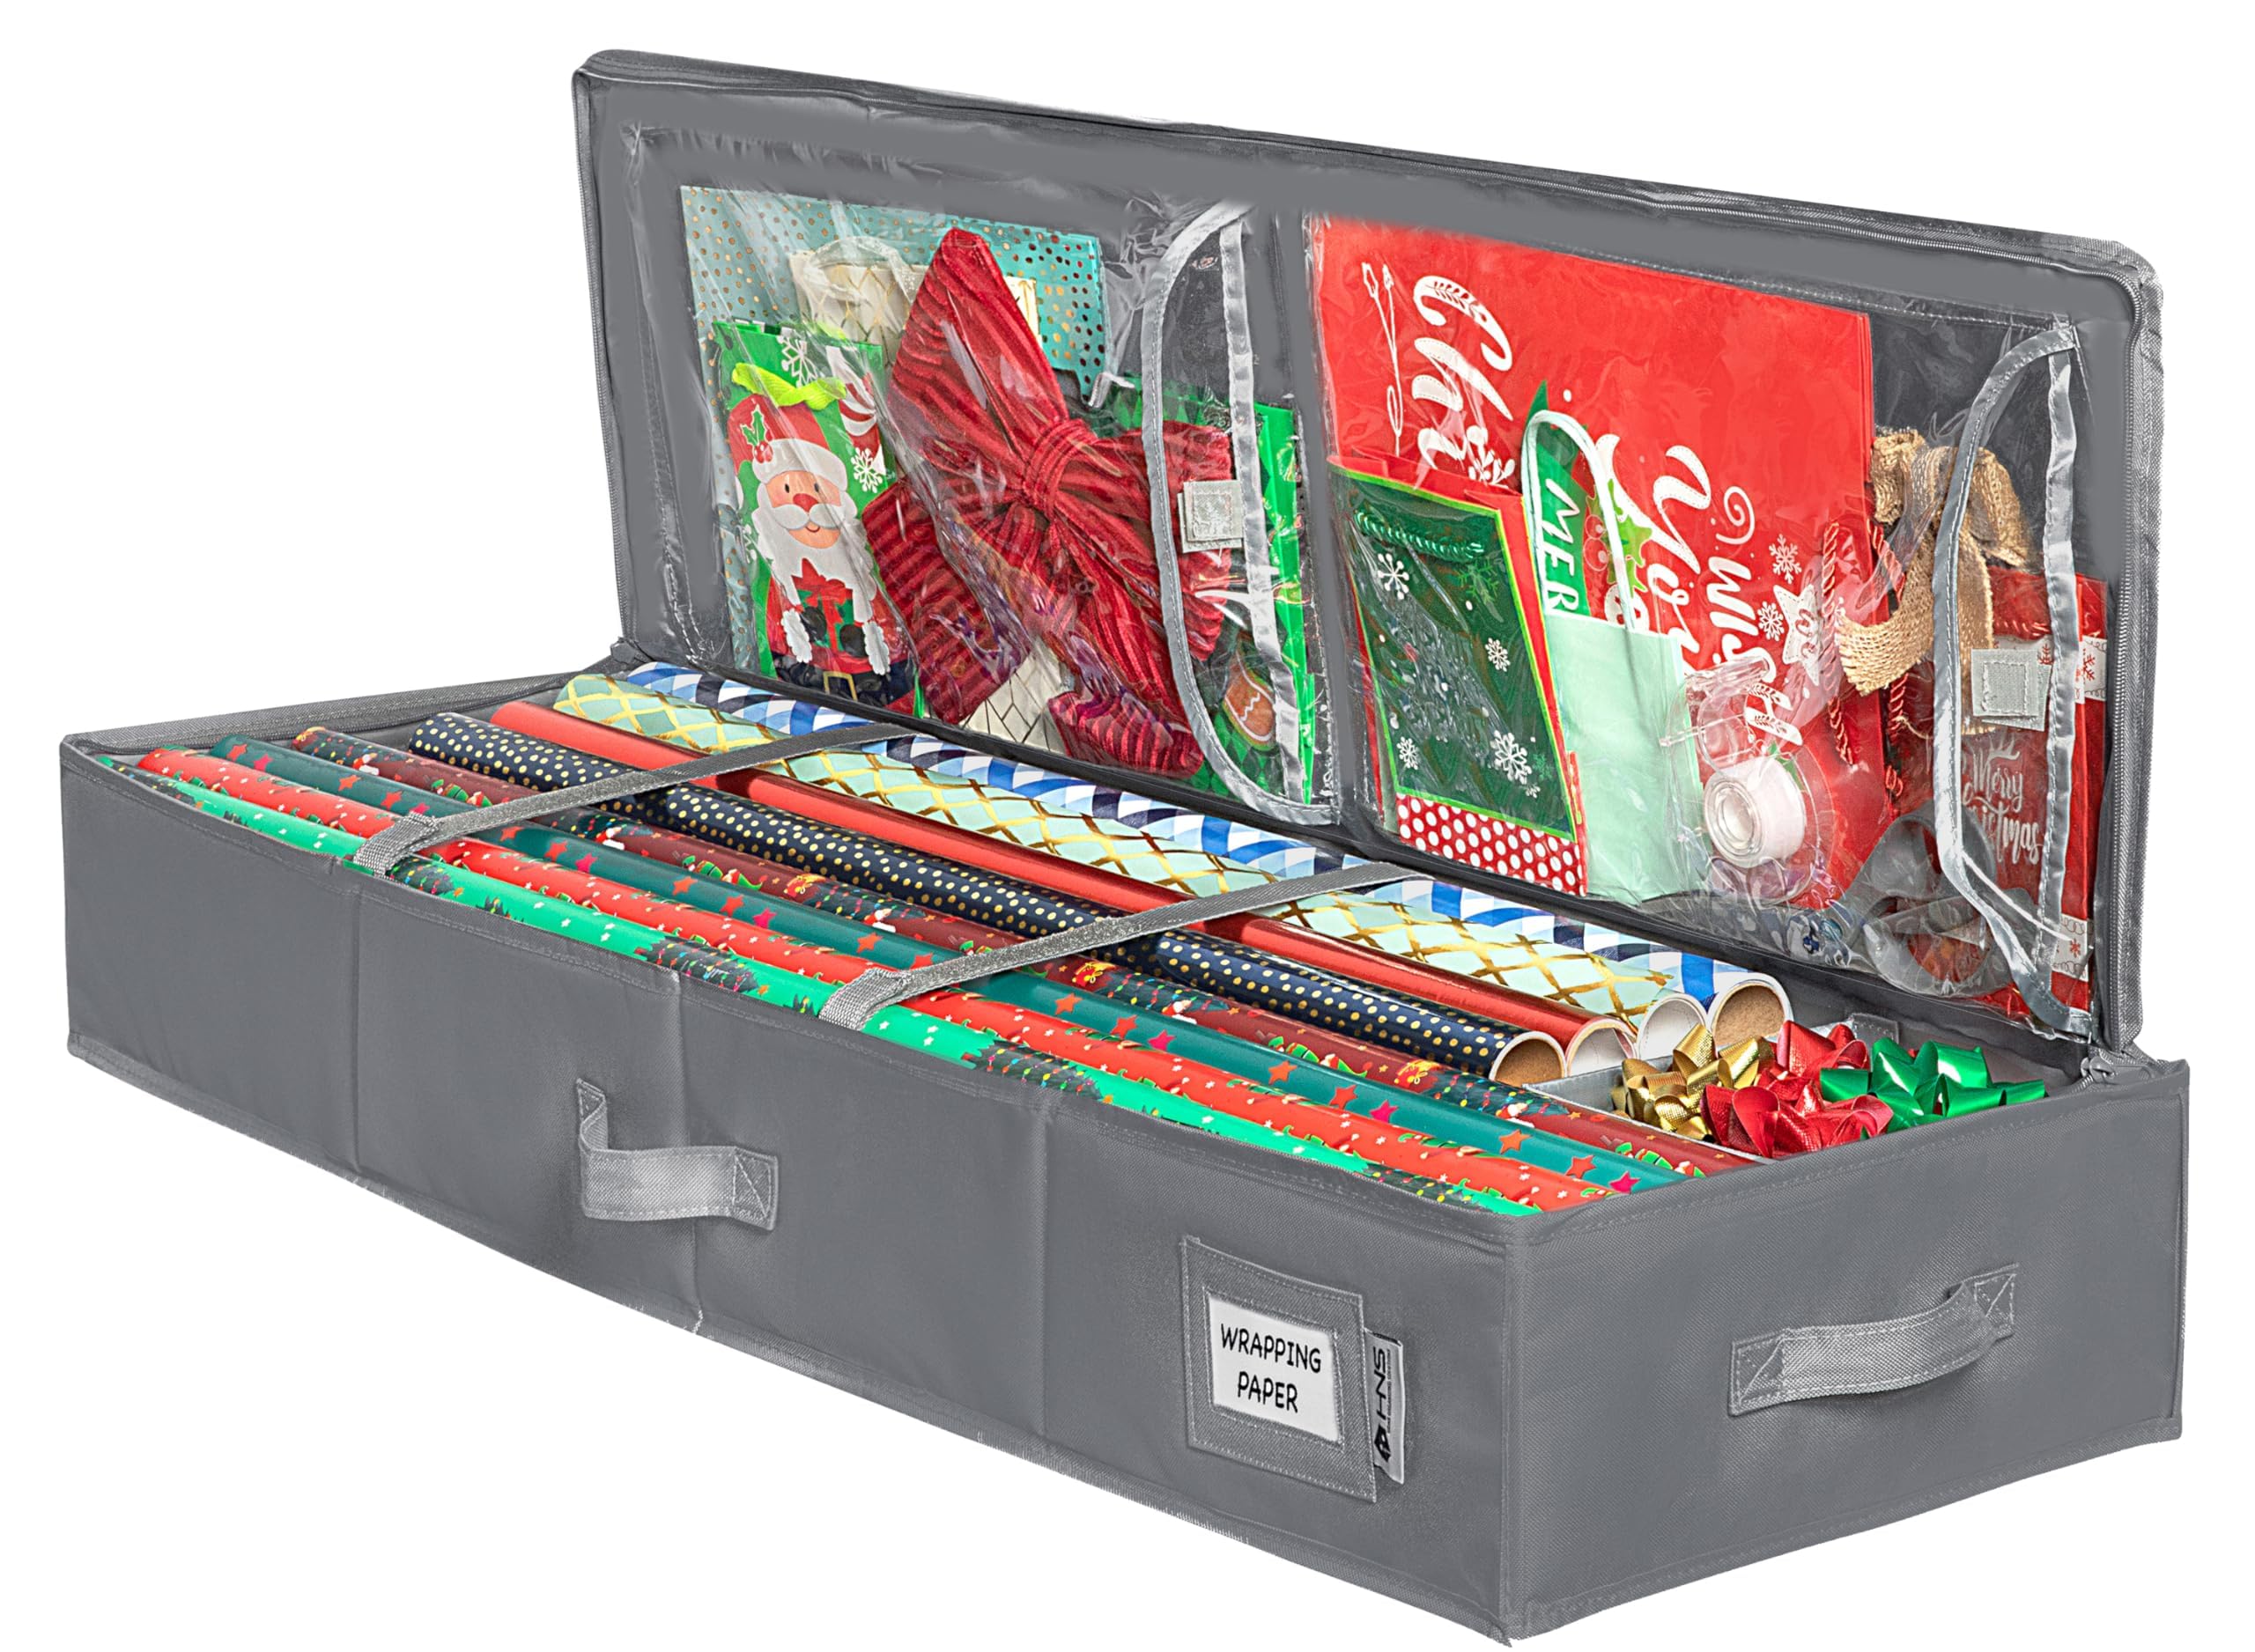 Christmas Storage Organizer - Wrapping Paper Storage and Under-Bed Storage Container for Holiday Storage of Gift Bags, Wrapping Paper, Ribbon, and Bows 600D  - Very Good